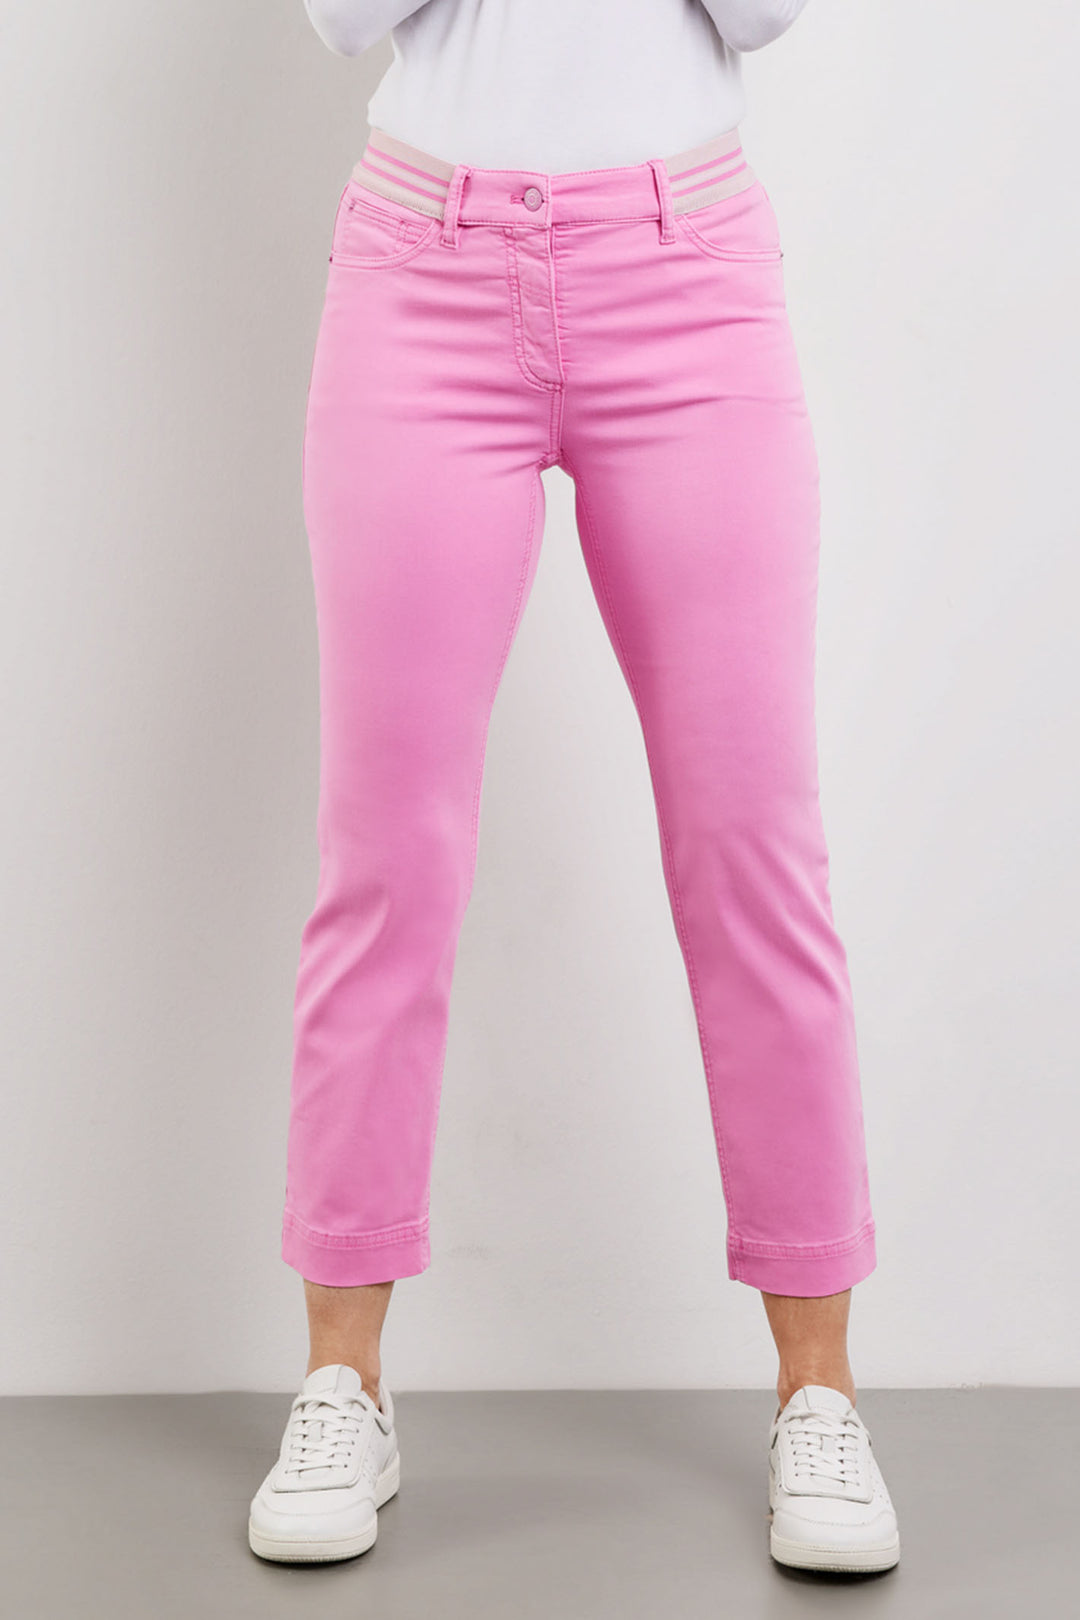 Gerry Weber 222028 Aurora Pink Straight Fit 78th Trousers - Experience Boutique - Experience Boutique